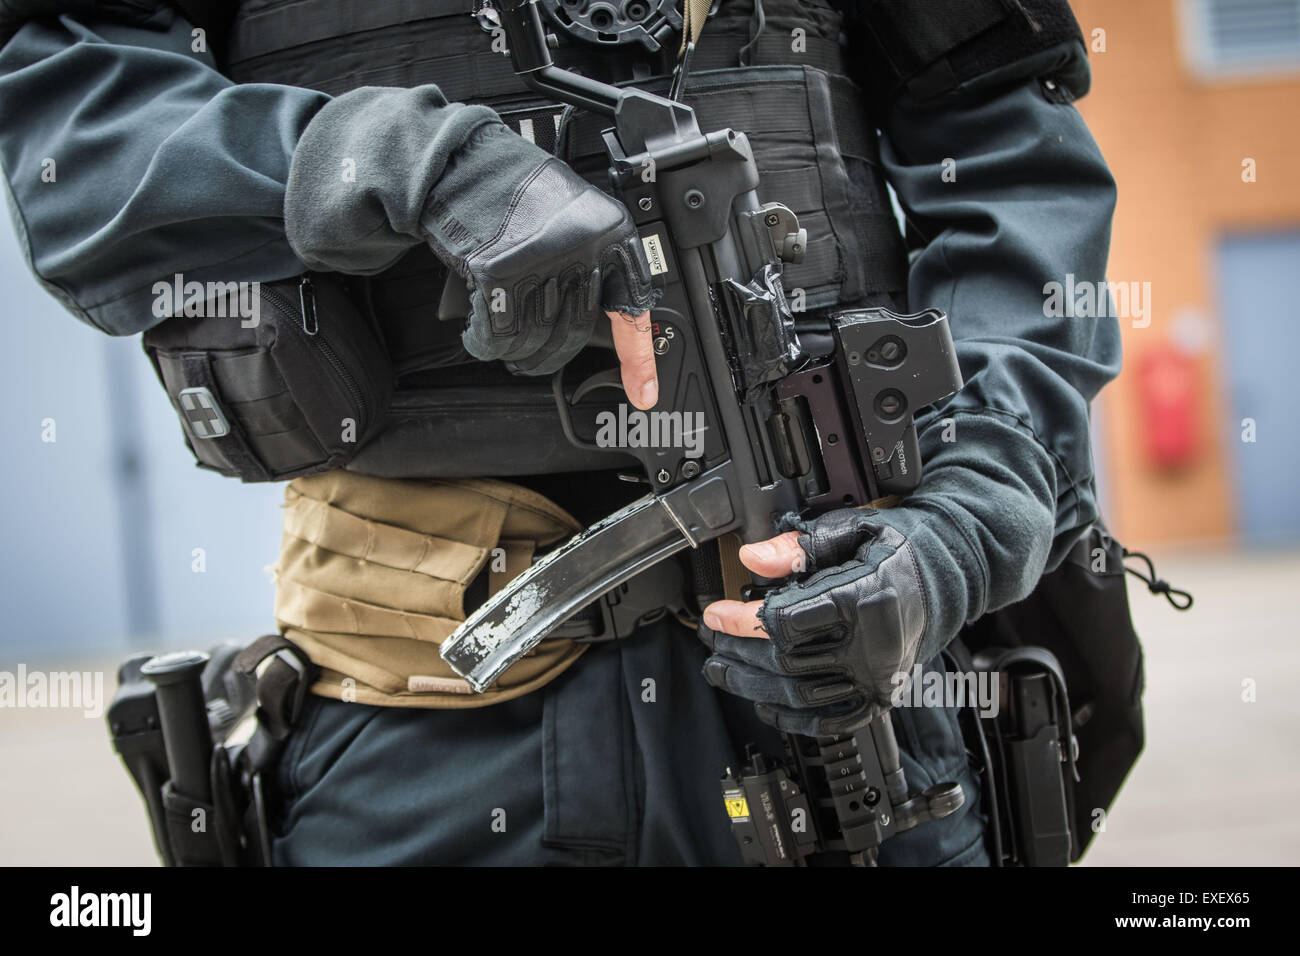 Mainz-Hechtsheim, Germany. 13th July, 2015. A member of a specialist commando force (SEK) at a a press conference in Mainz-Hechtsheim, Germany, 13 July 2015. The State Inner Minister for Rheinland-Palantine Roger Lewentz (SPD) was presented earlier some consequences of a possible terrorist attacks with the heads of the SEK and the MEK (Mobiles Einsatz Kommando) forces. Issues such a as changes in the equipment, the functions and organization of the special forces have also been addressed. Photo:FRANK RUMPENHORST/dpa/Alamy Live News Stock Photo